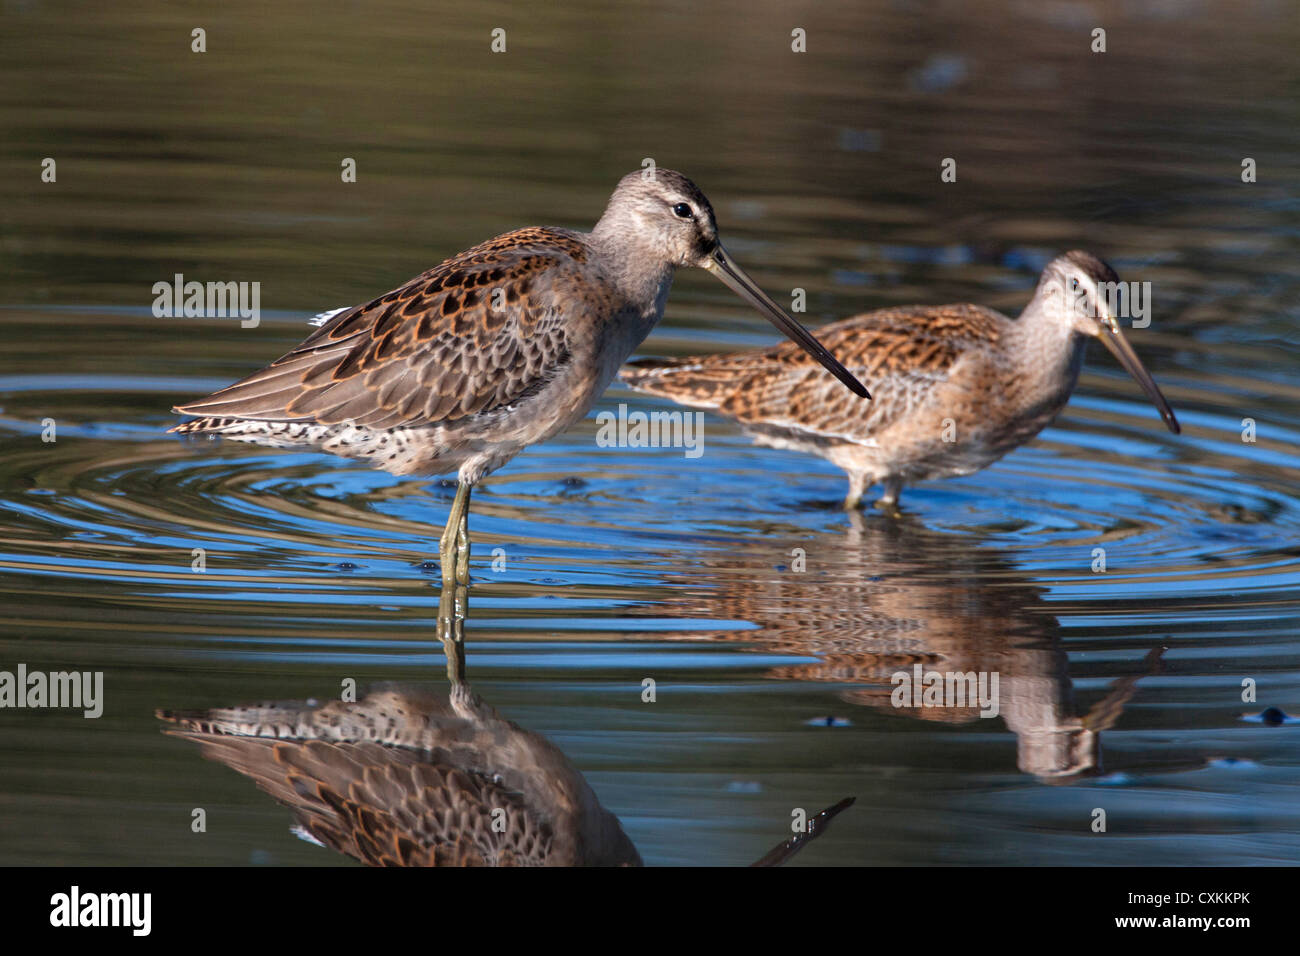 Long-billed Dowitchers Limnodromus scolopaceus feeding with reflection in water at French Creek, Vancouver Island, BC, Canada Stock Photo